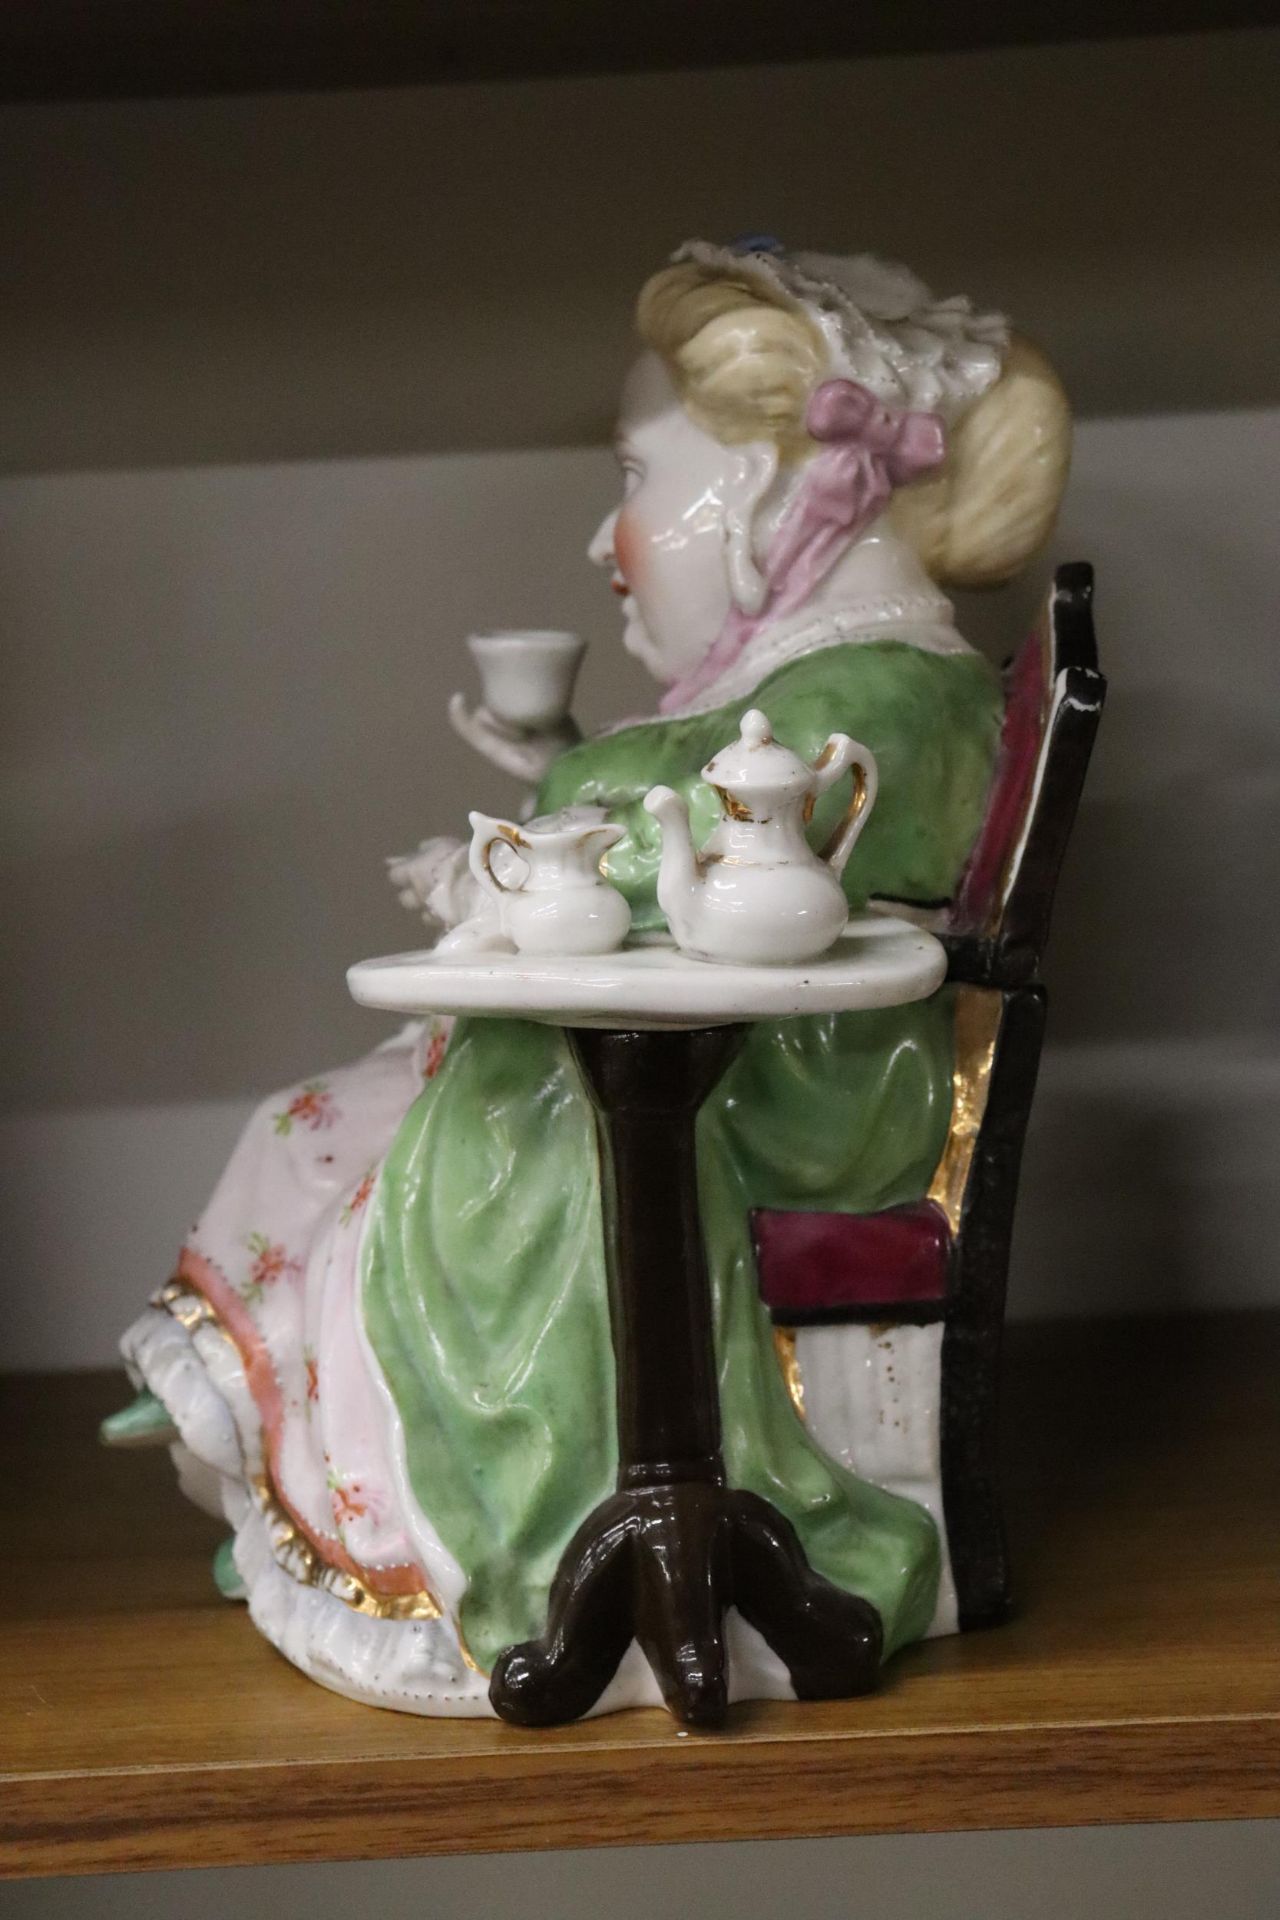 TWO VINTAGE ORIGINAL GERMAN TOBACCO JARS, A MAN AND A LADY WITH A CUP OF TEA, GOOD COLOURS, JOHN - Image 8 of 11